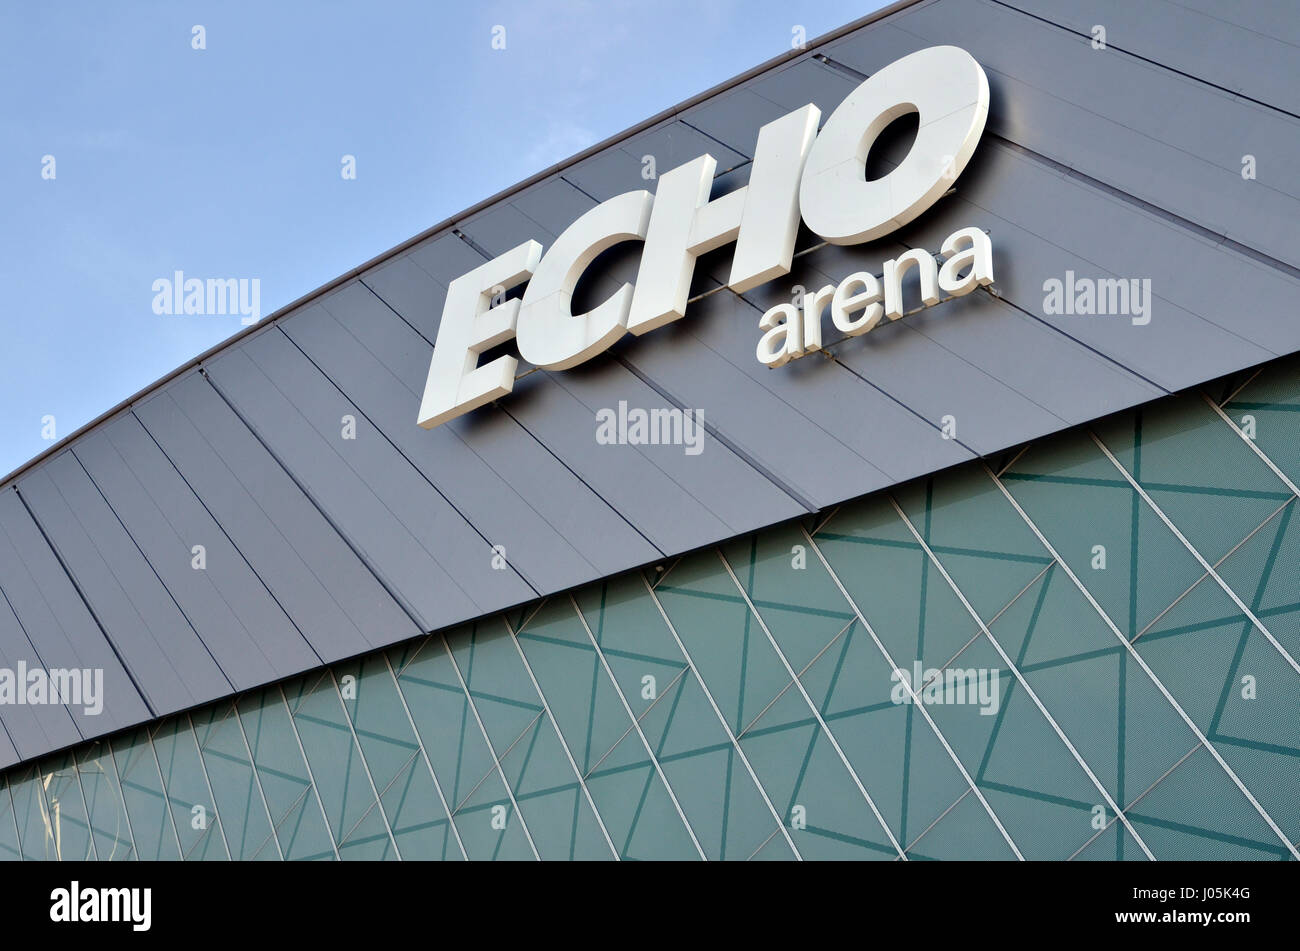 The Liverpool Echo Arena on the former King's Dock in Liverpool, Merseyside Stock Photo